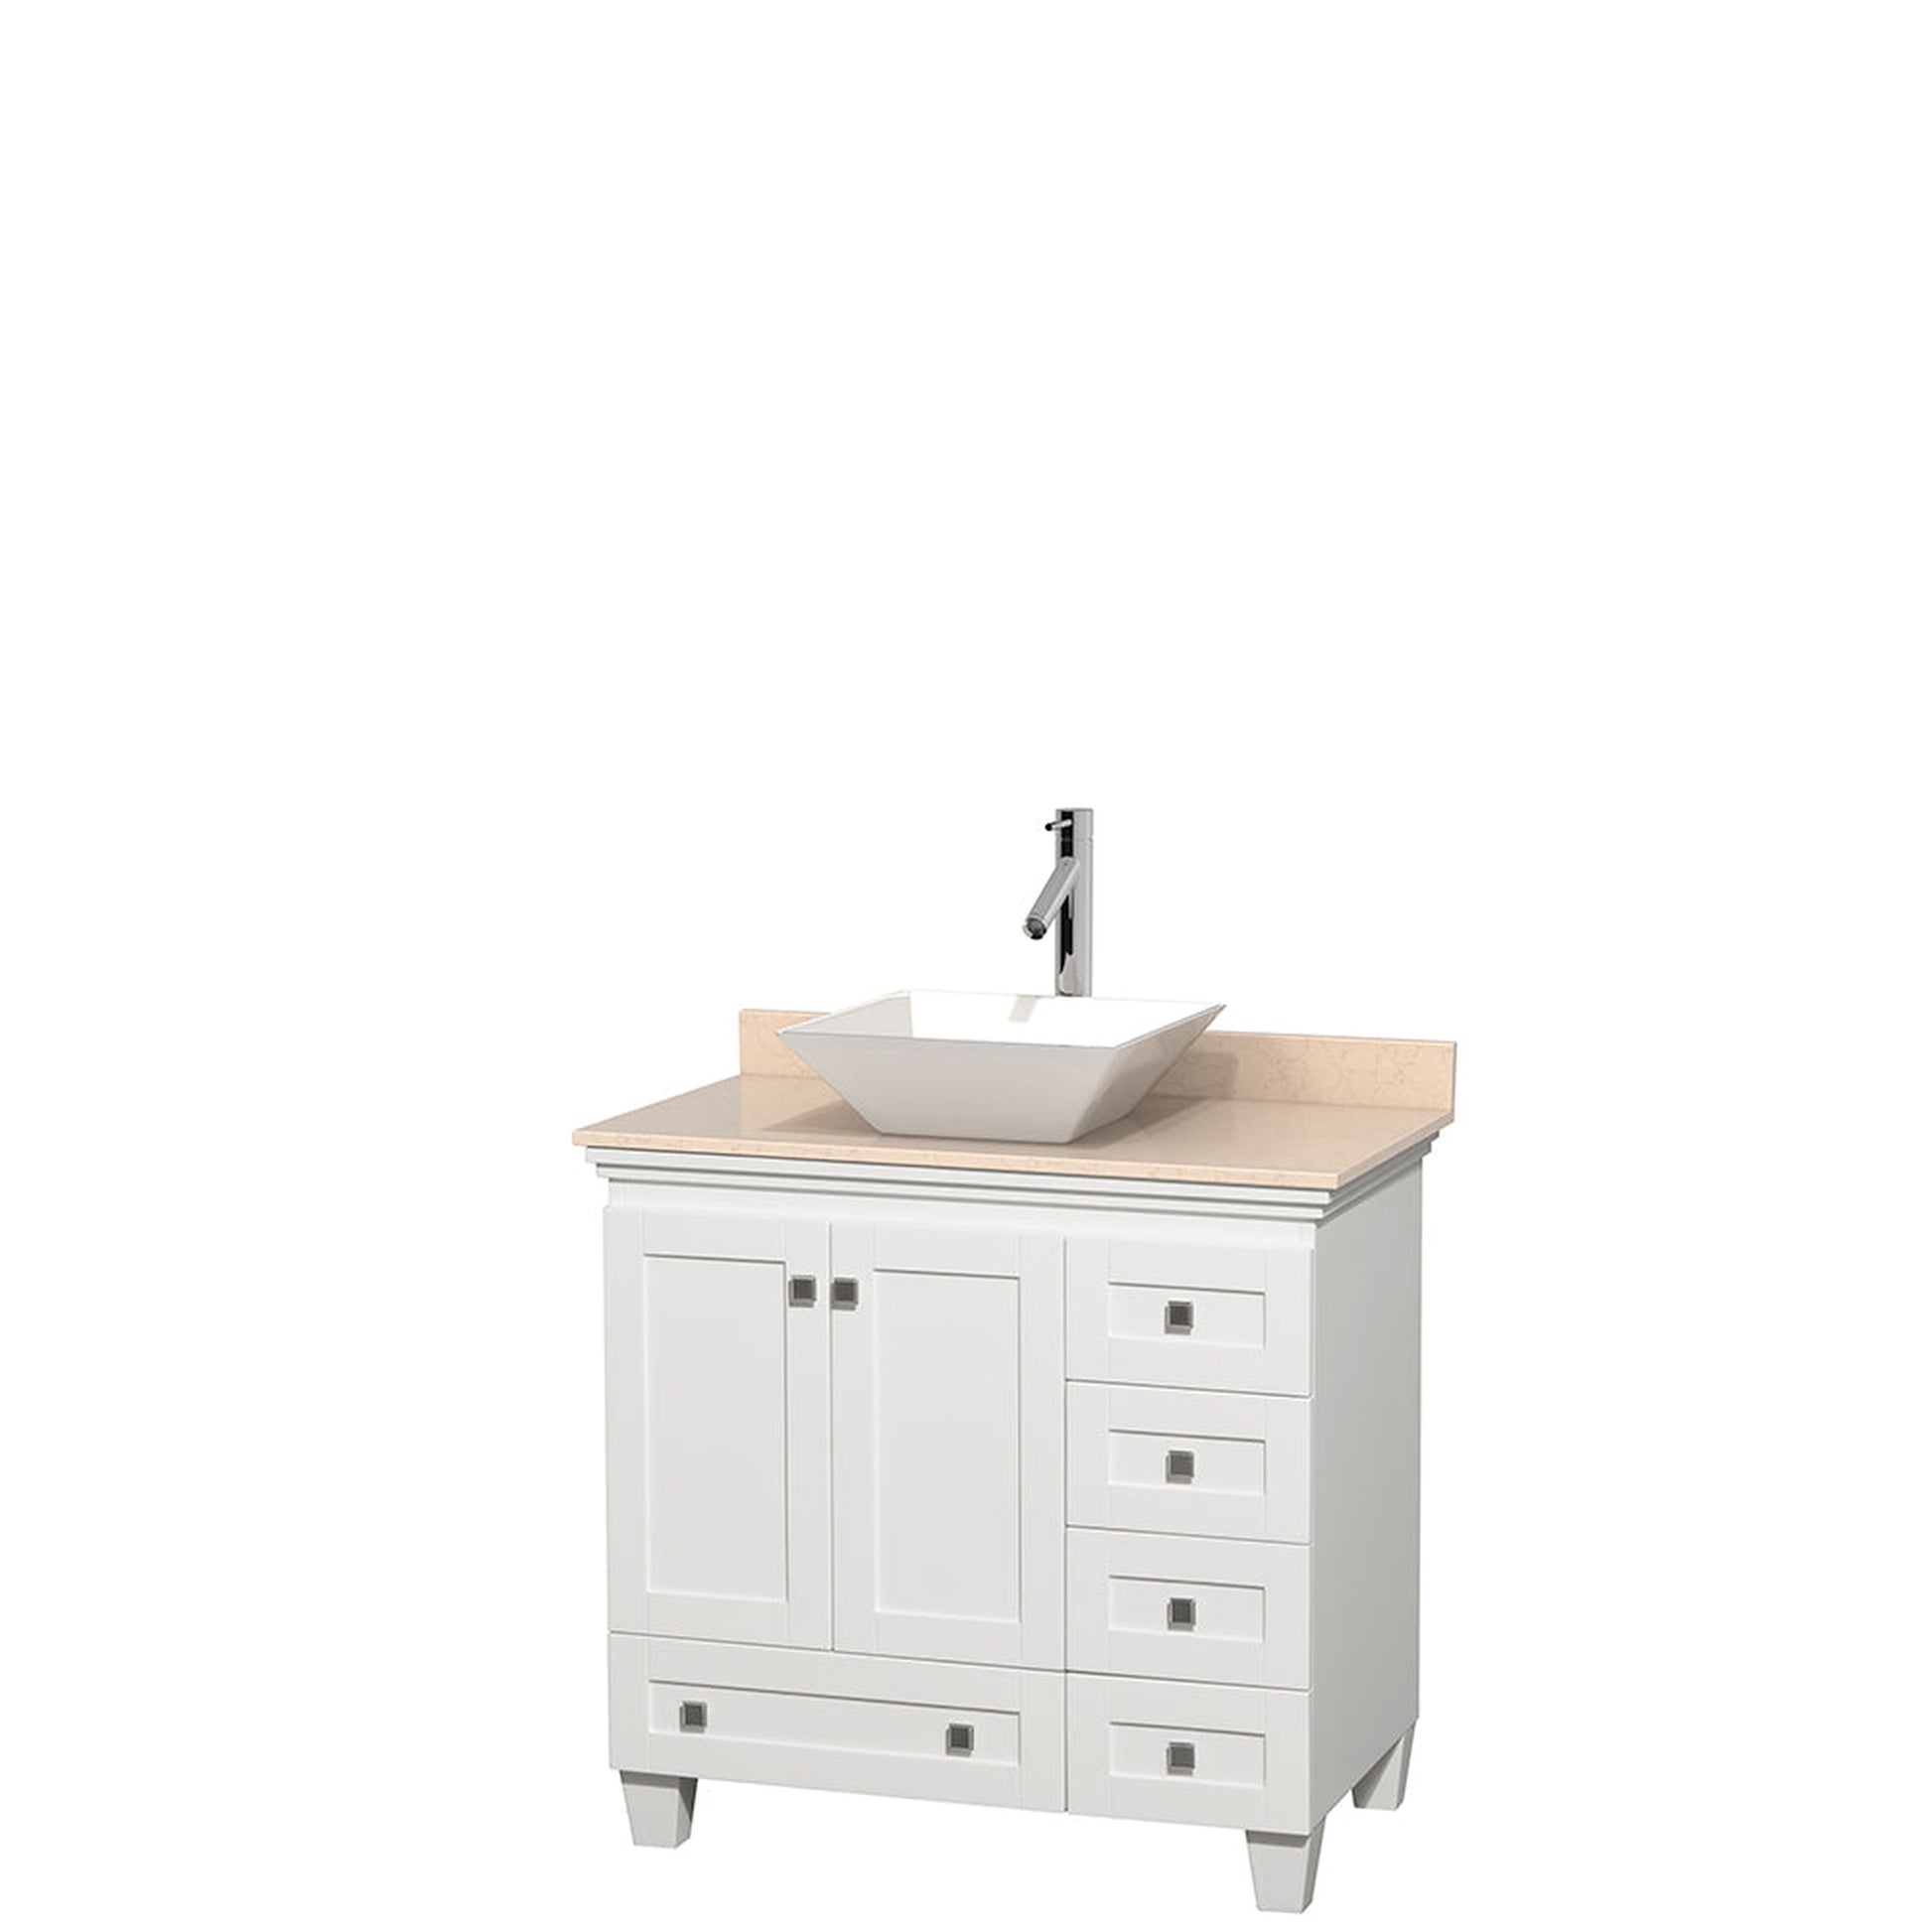 Wyndham Collection Acclaim 36" Single Bathroom Vanity in White With Ivory Marble Countertop & Pyra White Porcelain Sink